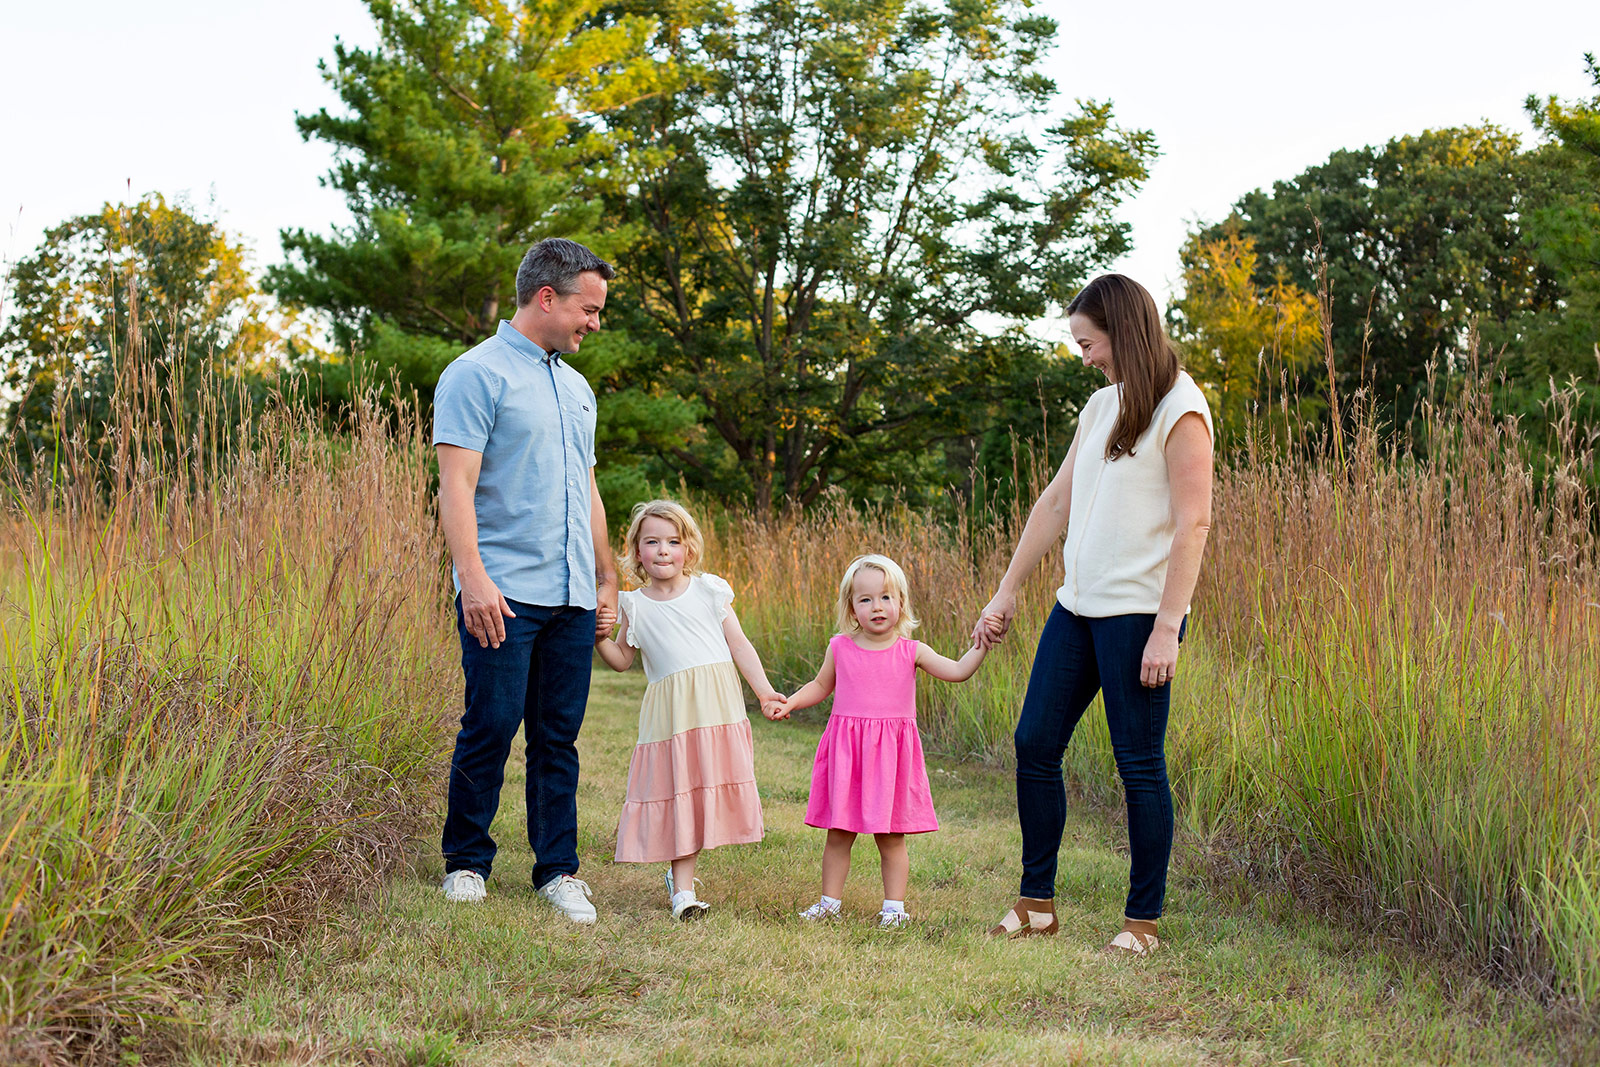 John and Ella hold hands with their girls as they walk through tall grasses.